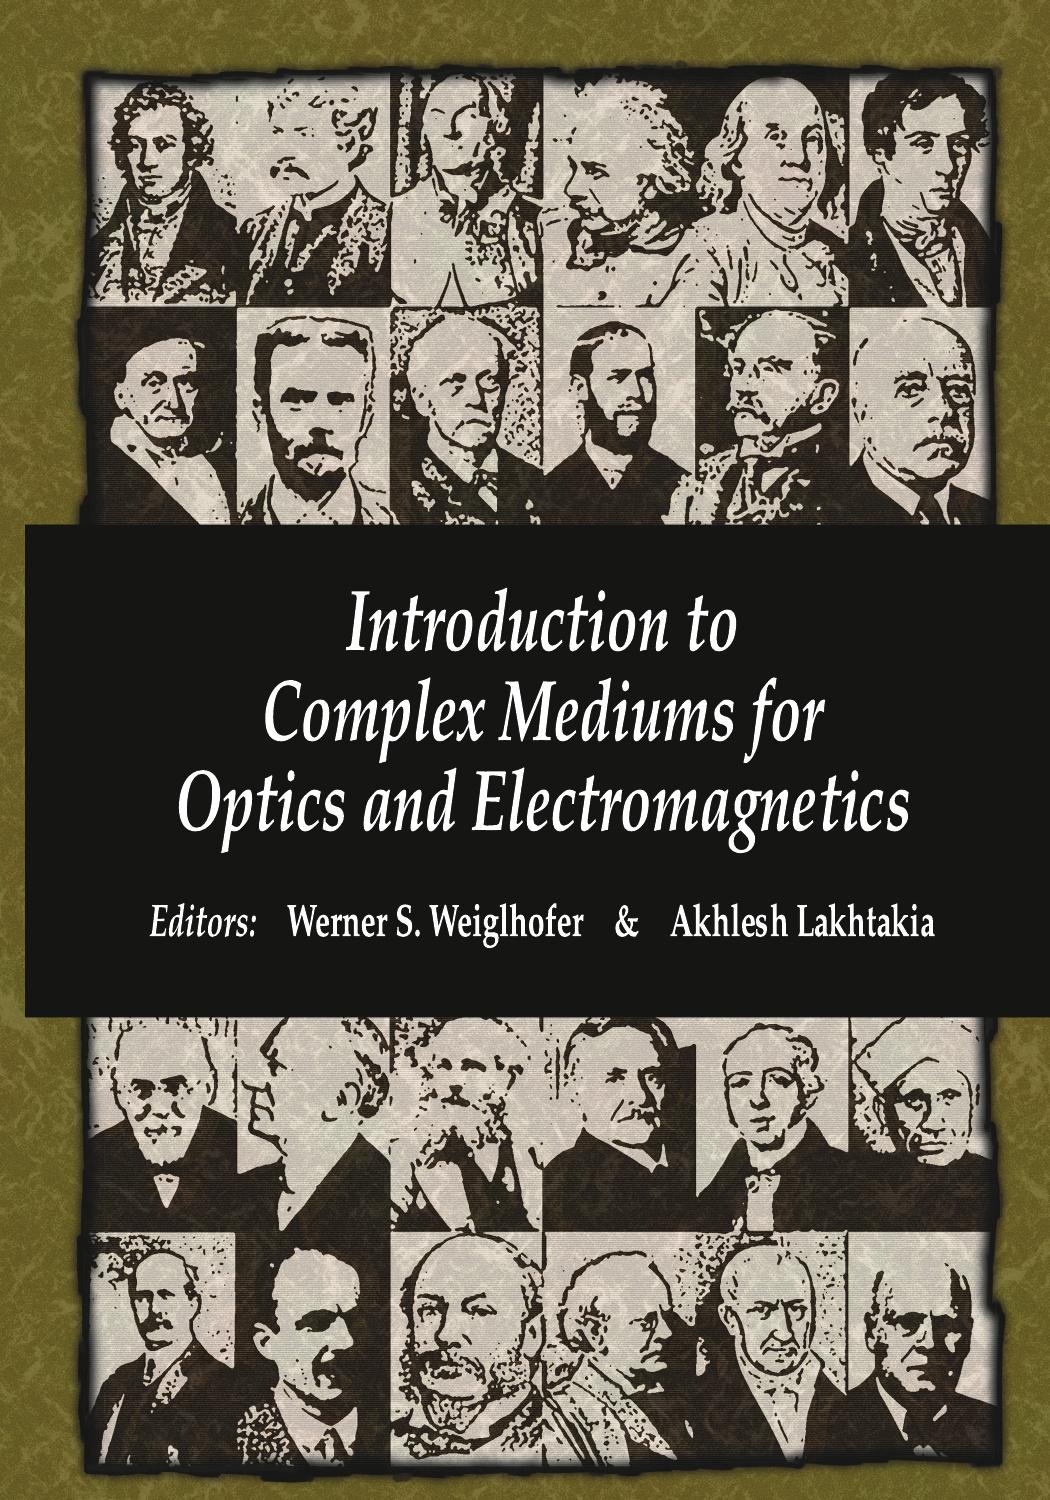 Introduction to Complex Mediums for Optics and Electromagnetics